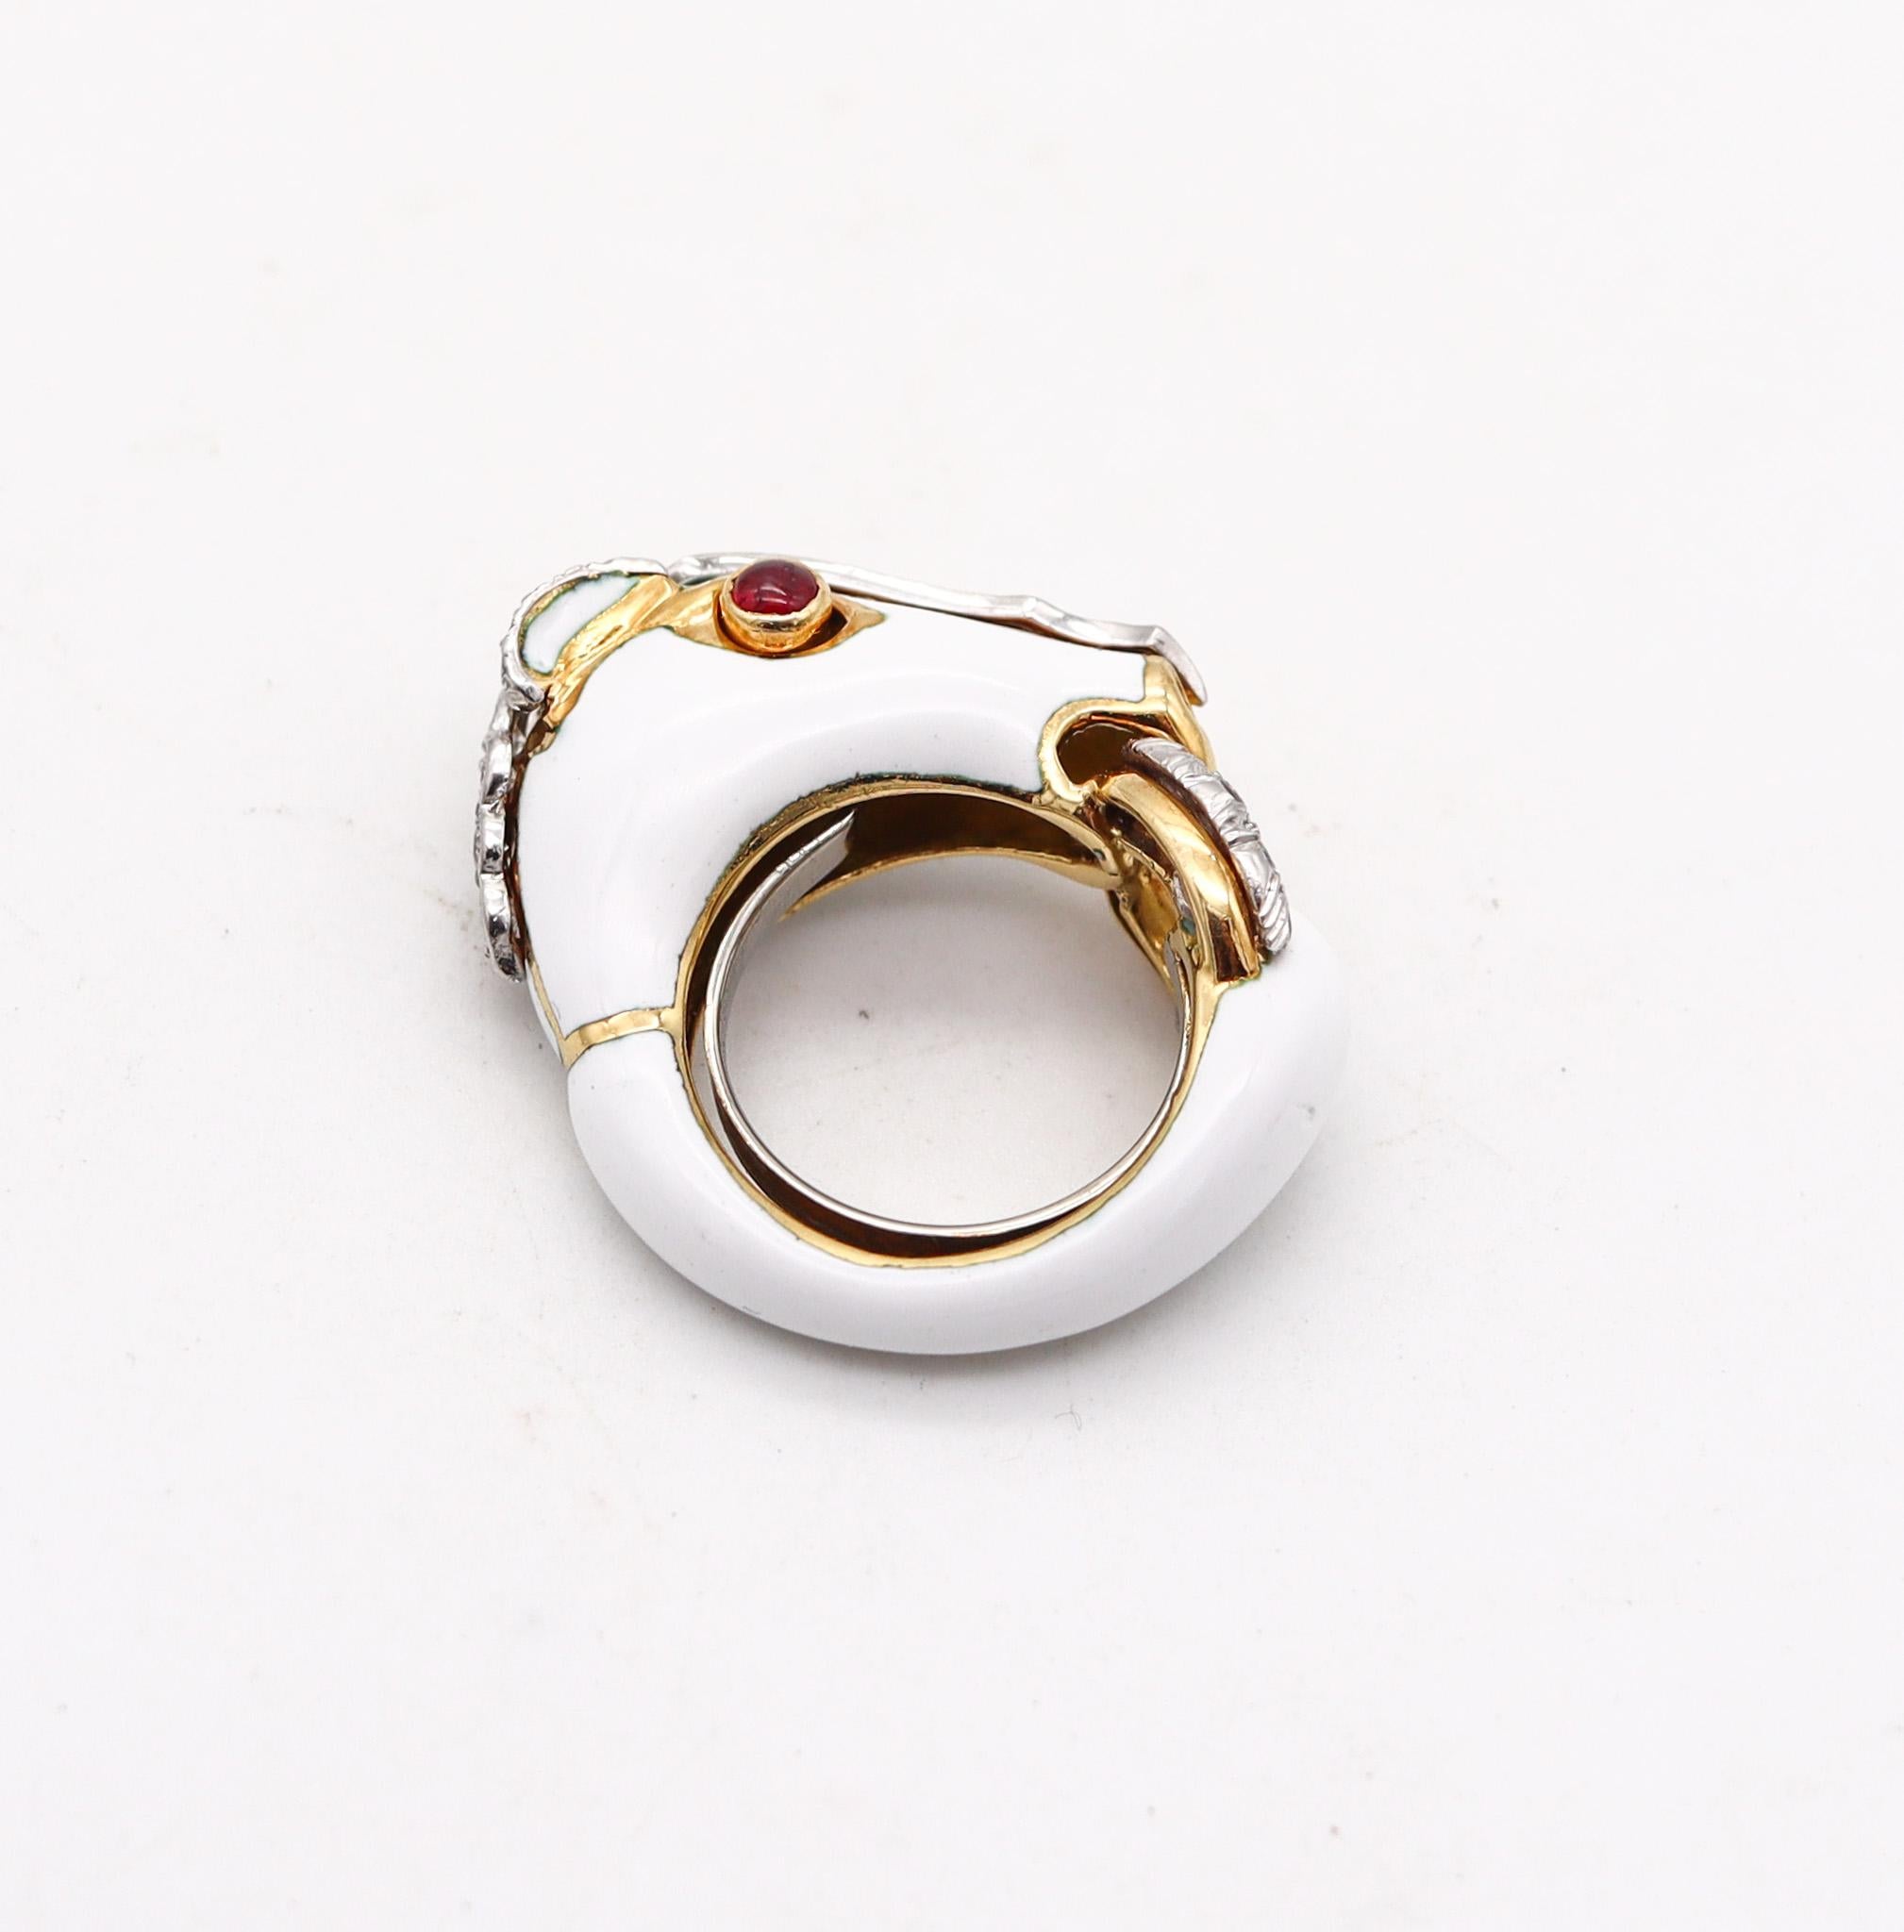 Brilliant Cut David Webb Enameled Horse Ring In 18Kt Gold And Platinum With Diamonds & Rubies For Sale